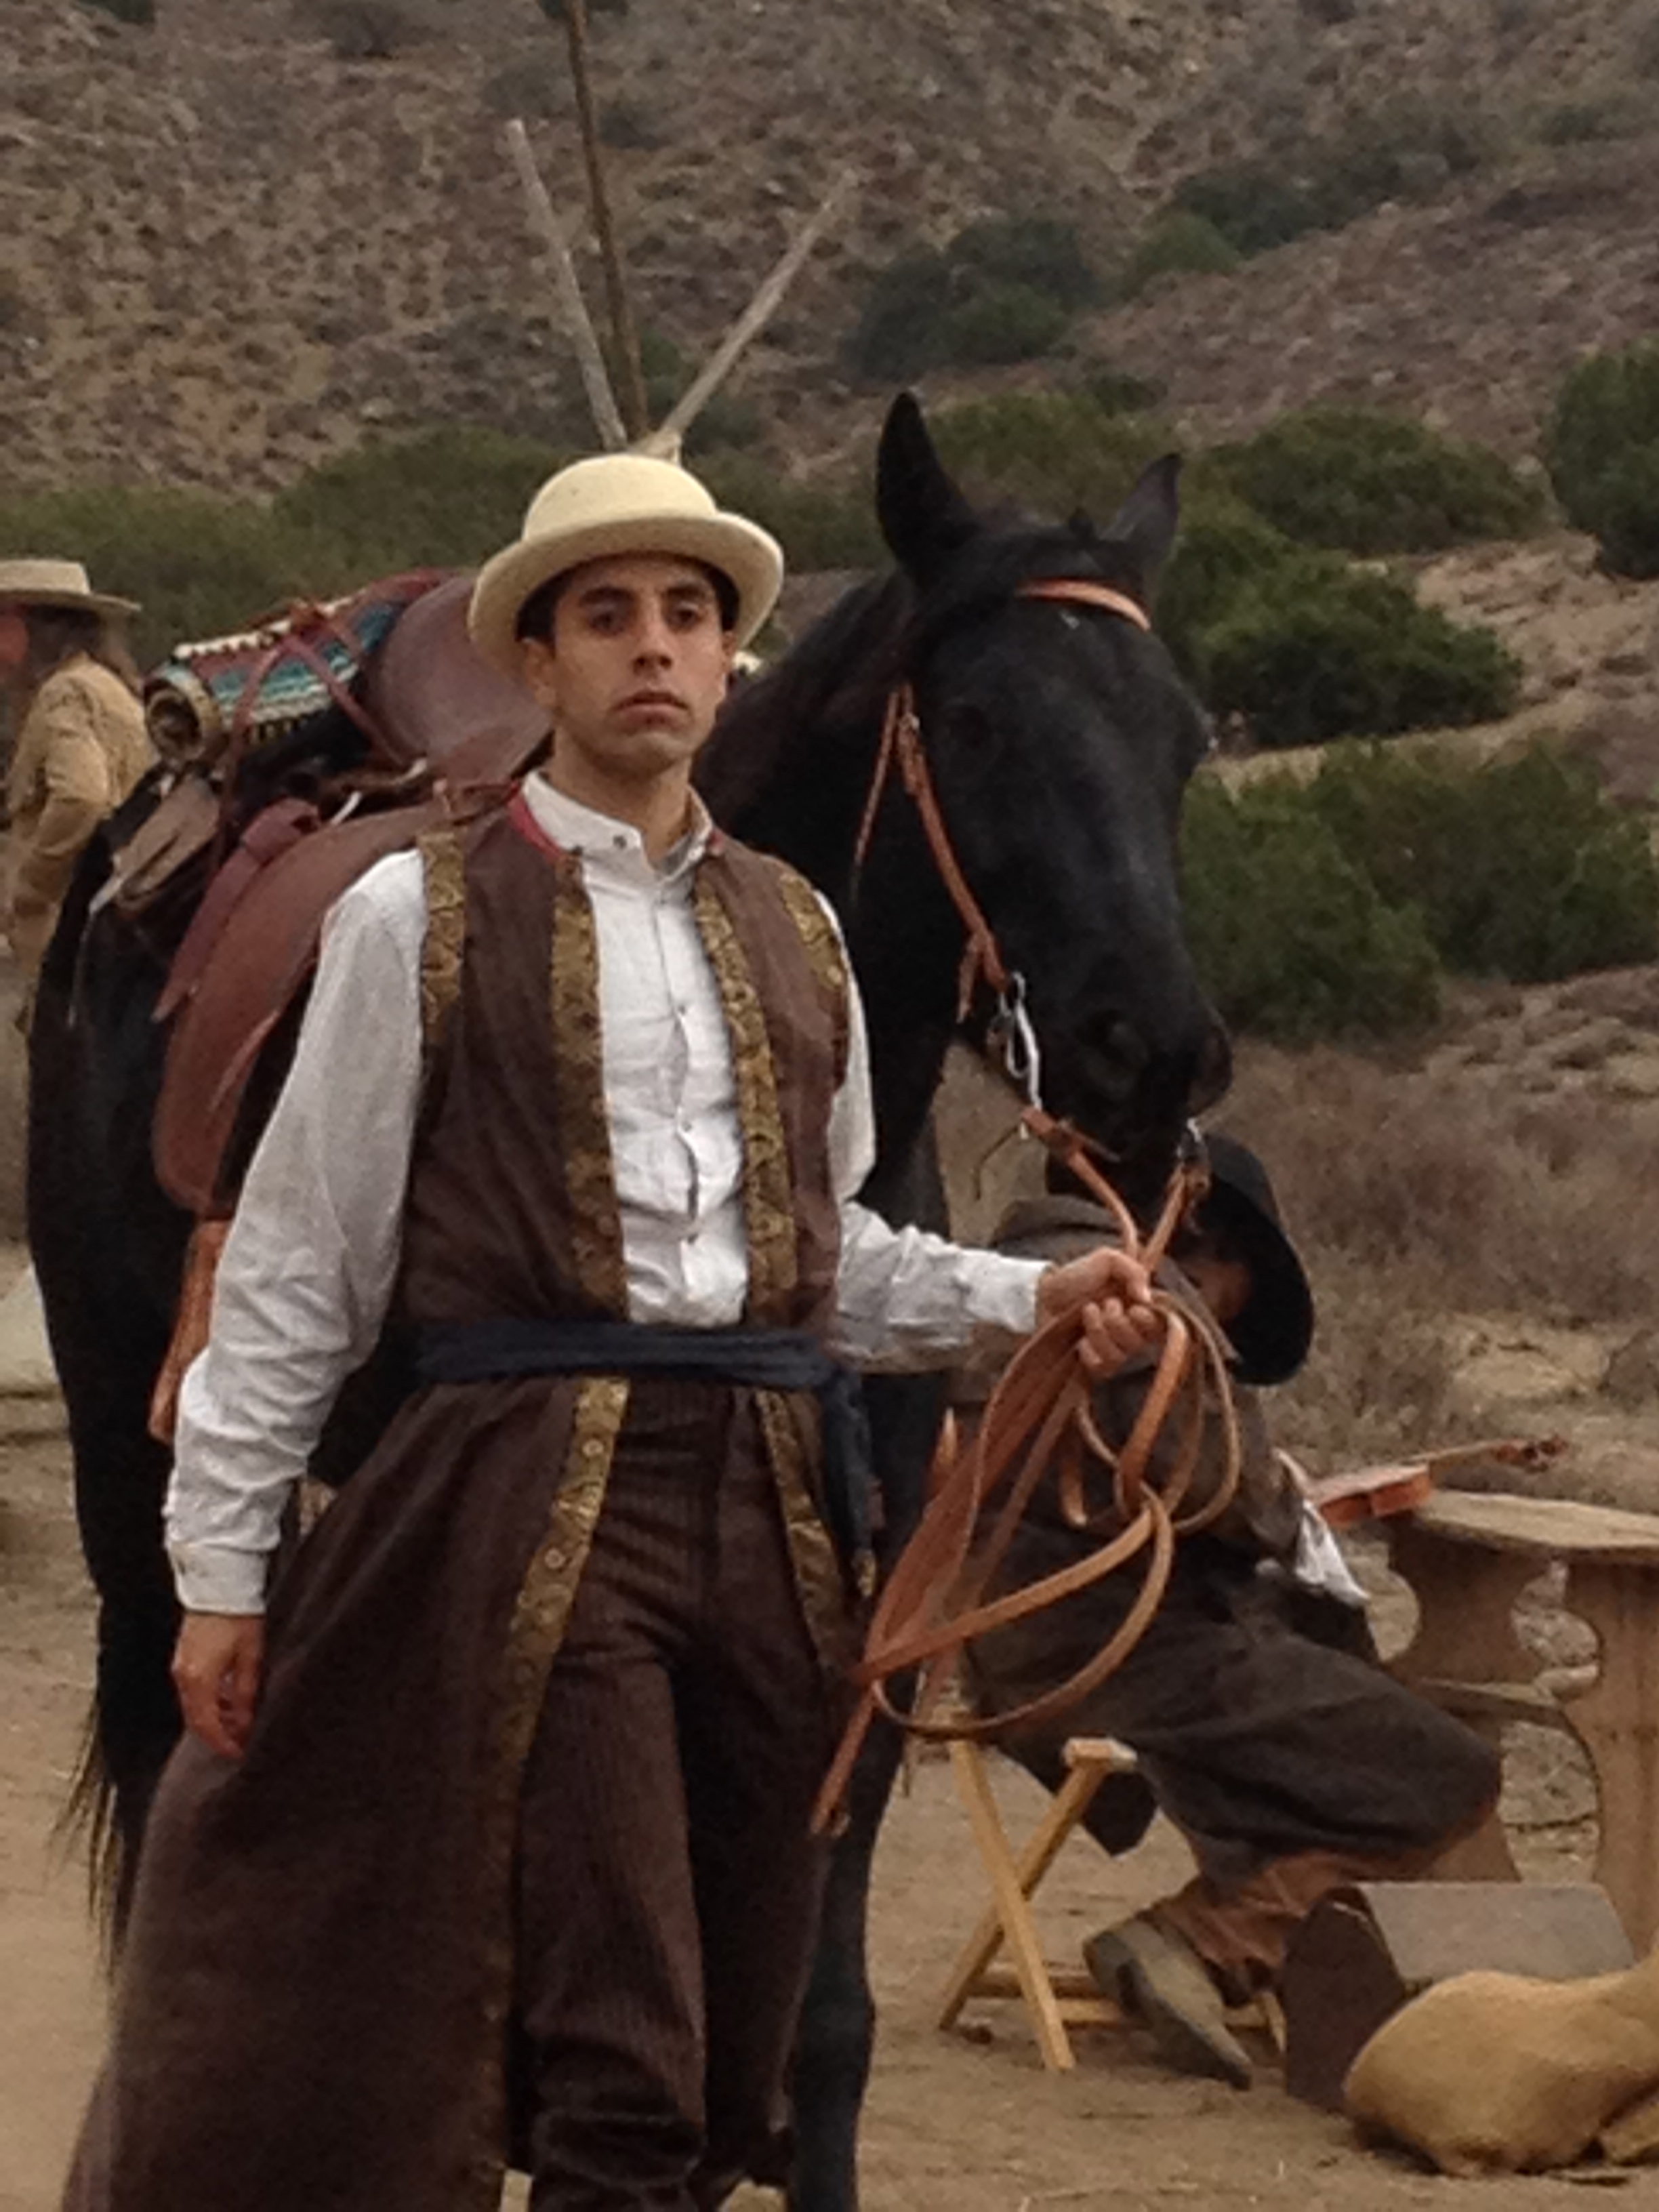 WESTERN RELIGION premiered at Cannes Film Festival 2015